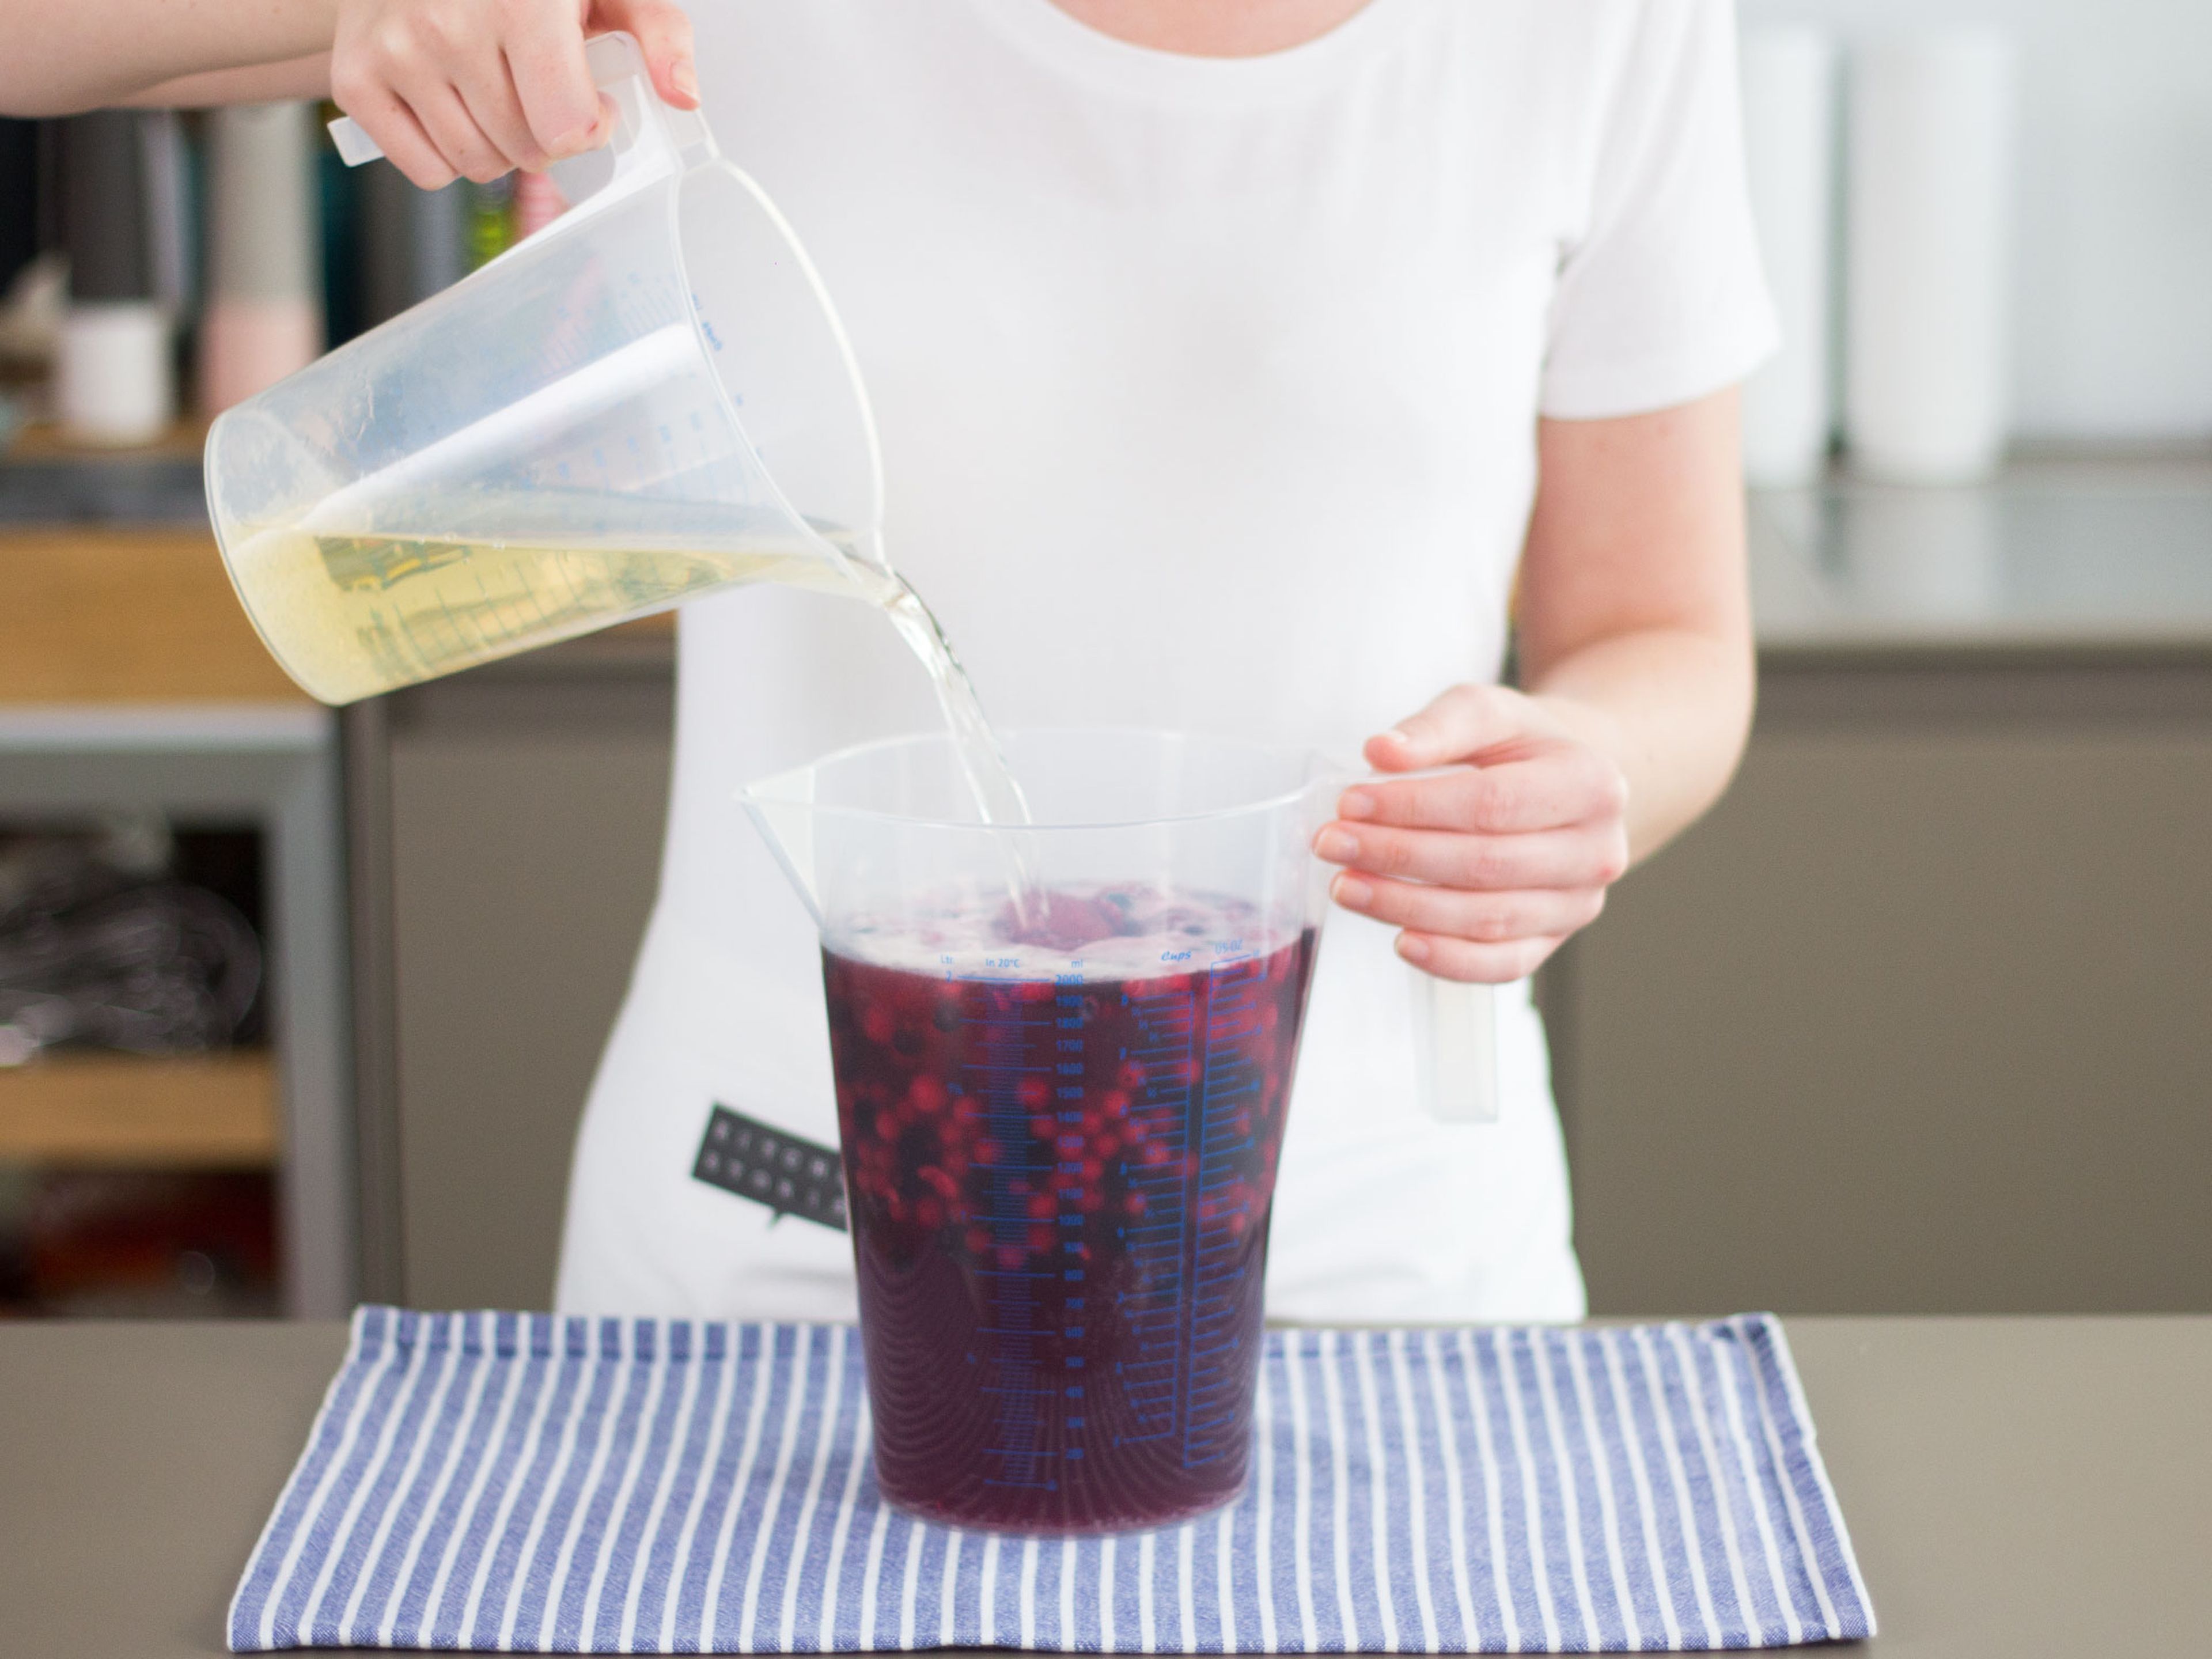 Combine the sparkling wine, wheat beer, raspberry syrup and mixed frozen berries in a measuring cup.